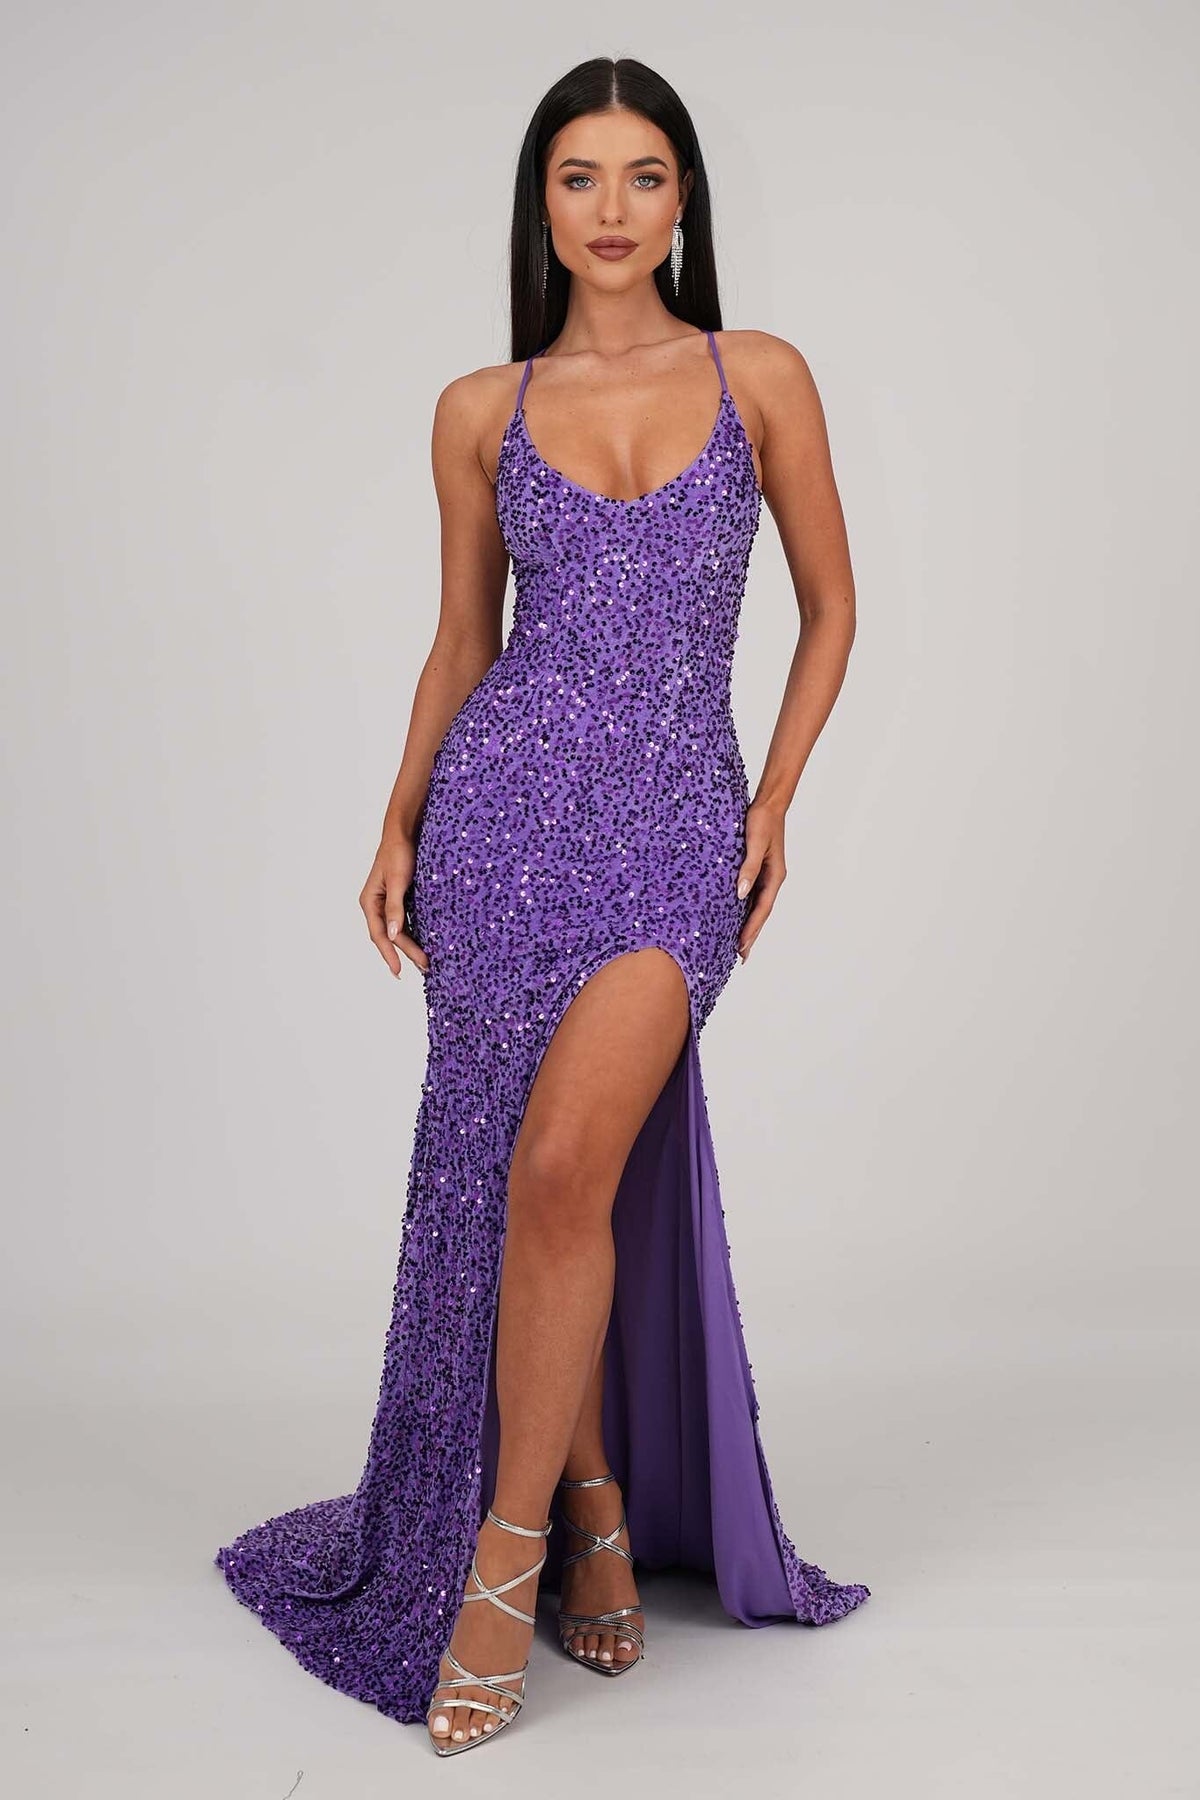 Purple Velvet Sequin Full Length Evening Gown with V Neckline, Thin Shoulder Straps, Thigh High Side Split and Lace Up Open Back